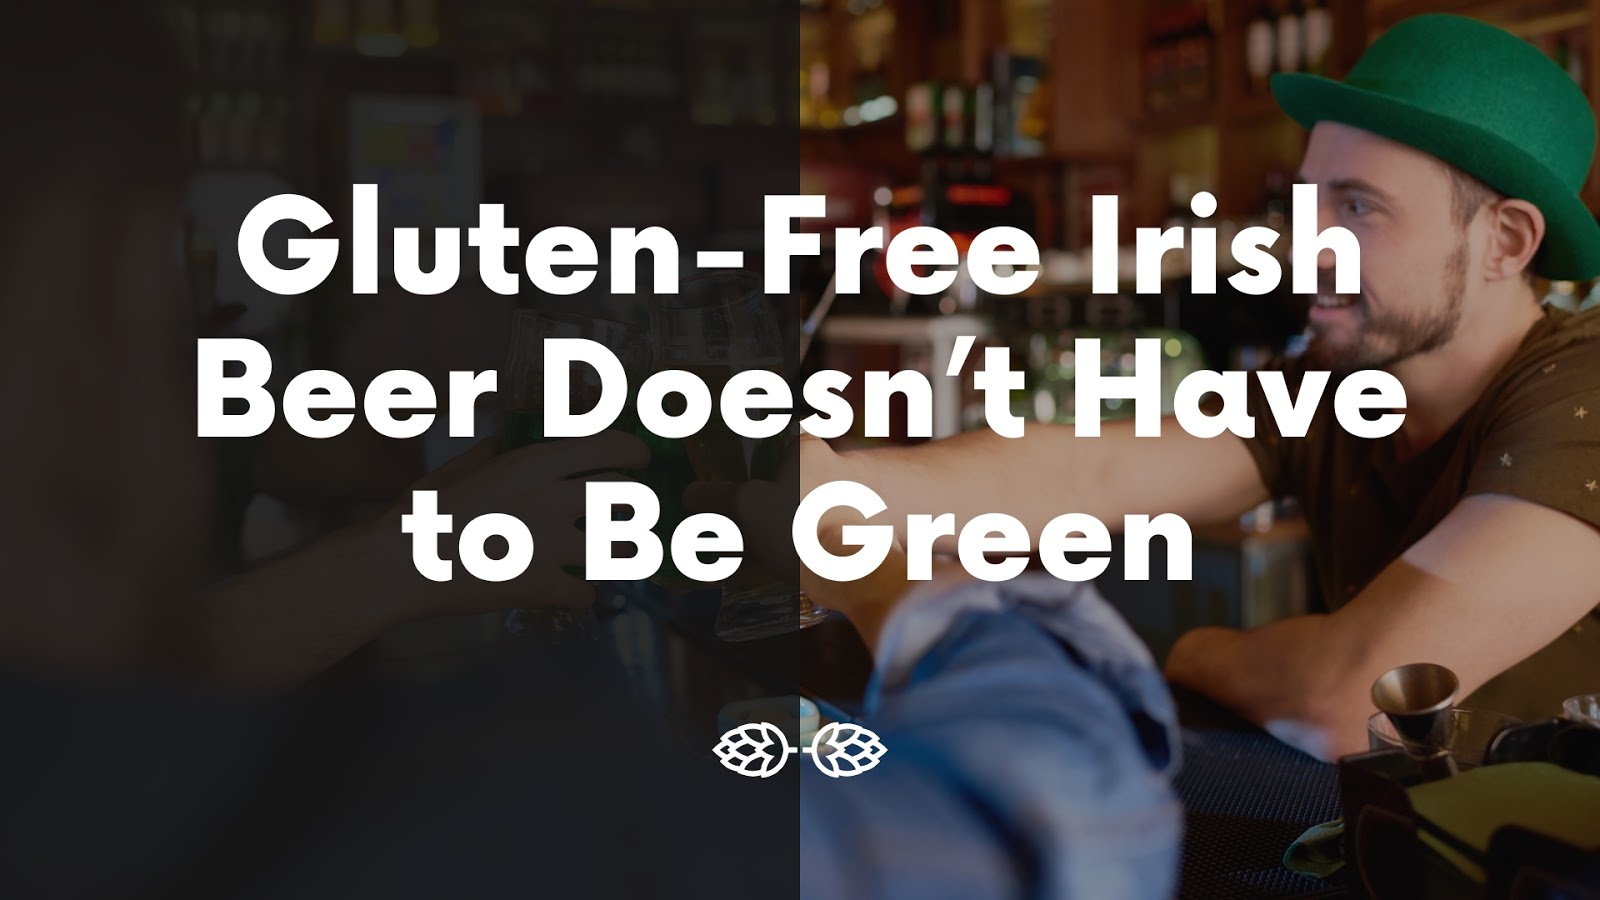 Gluten-Free Irish Beer Doesn't Have to be Green